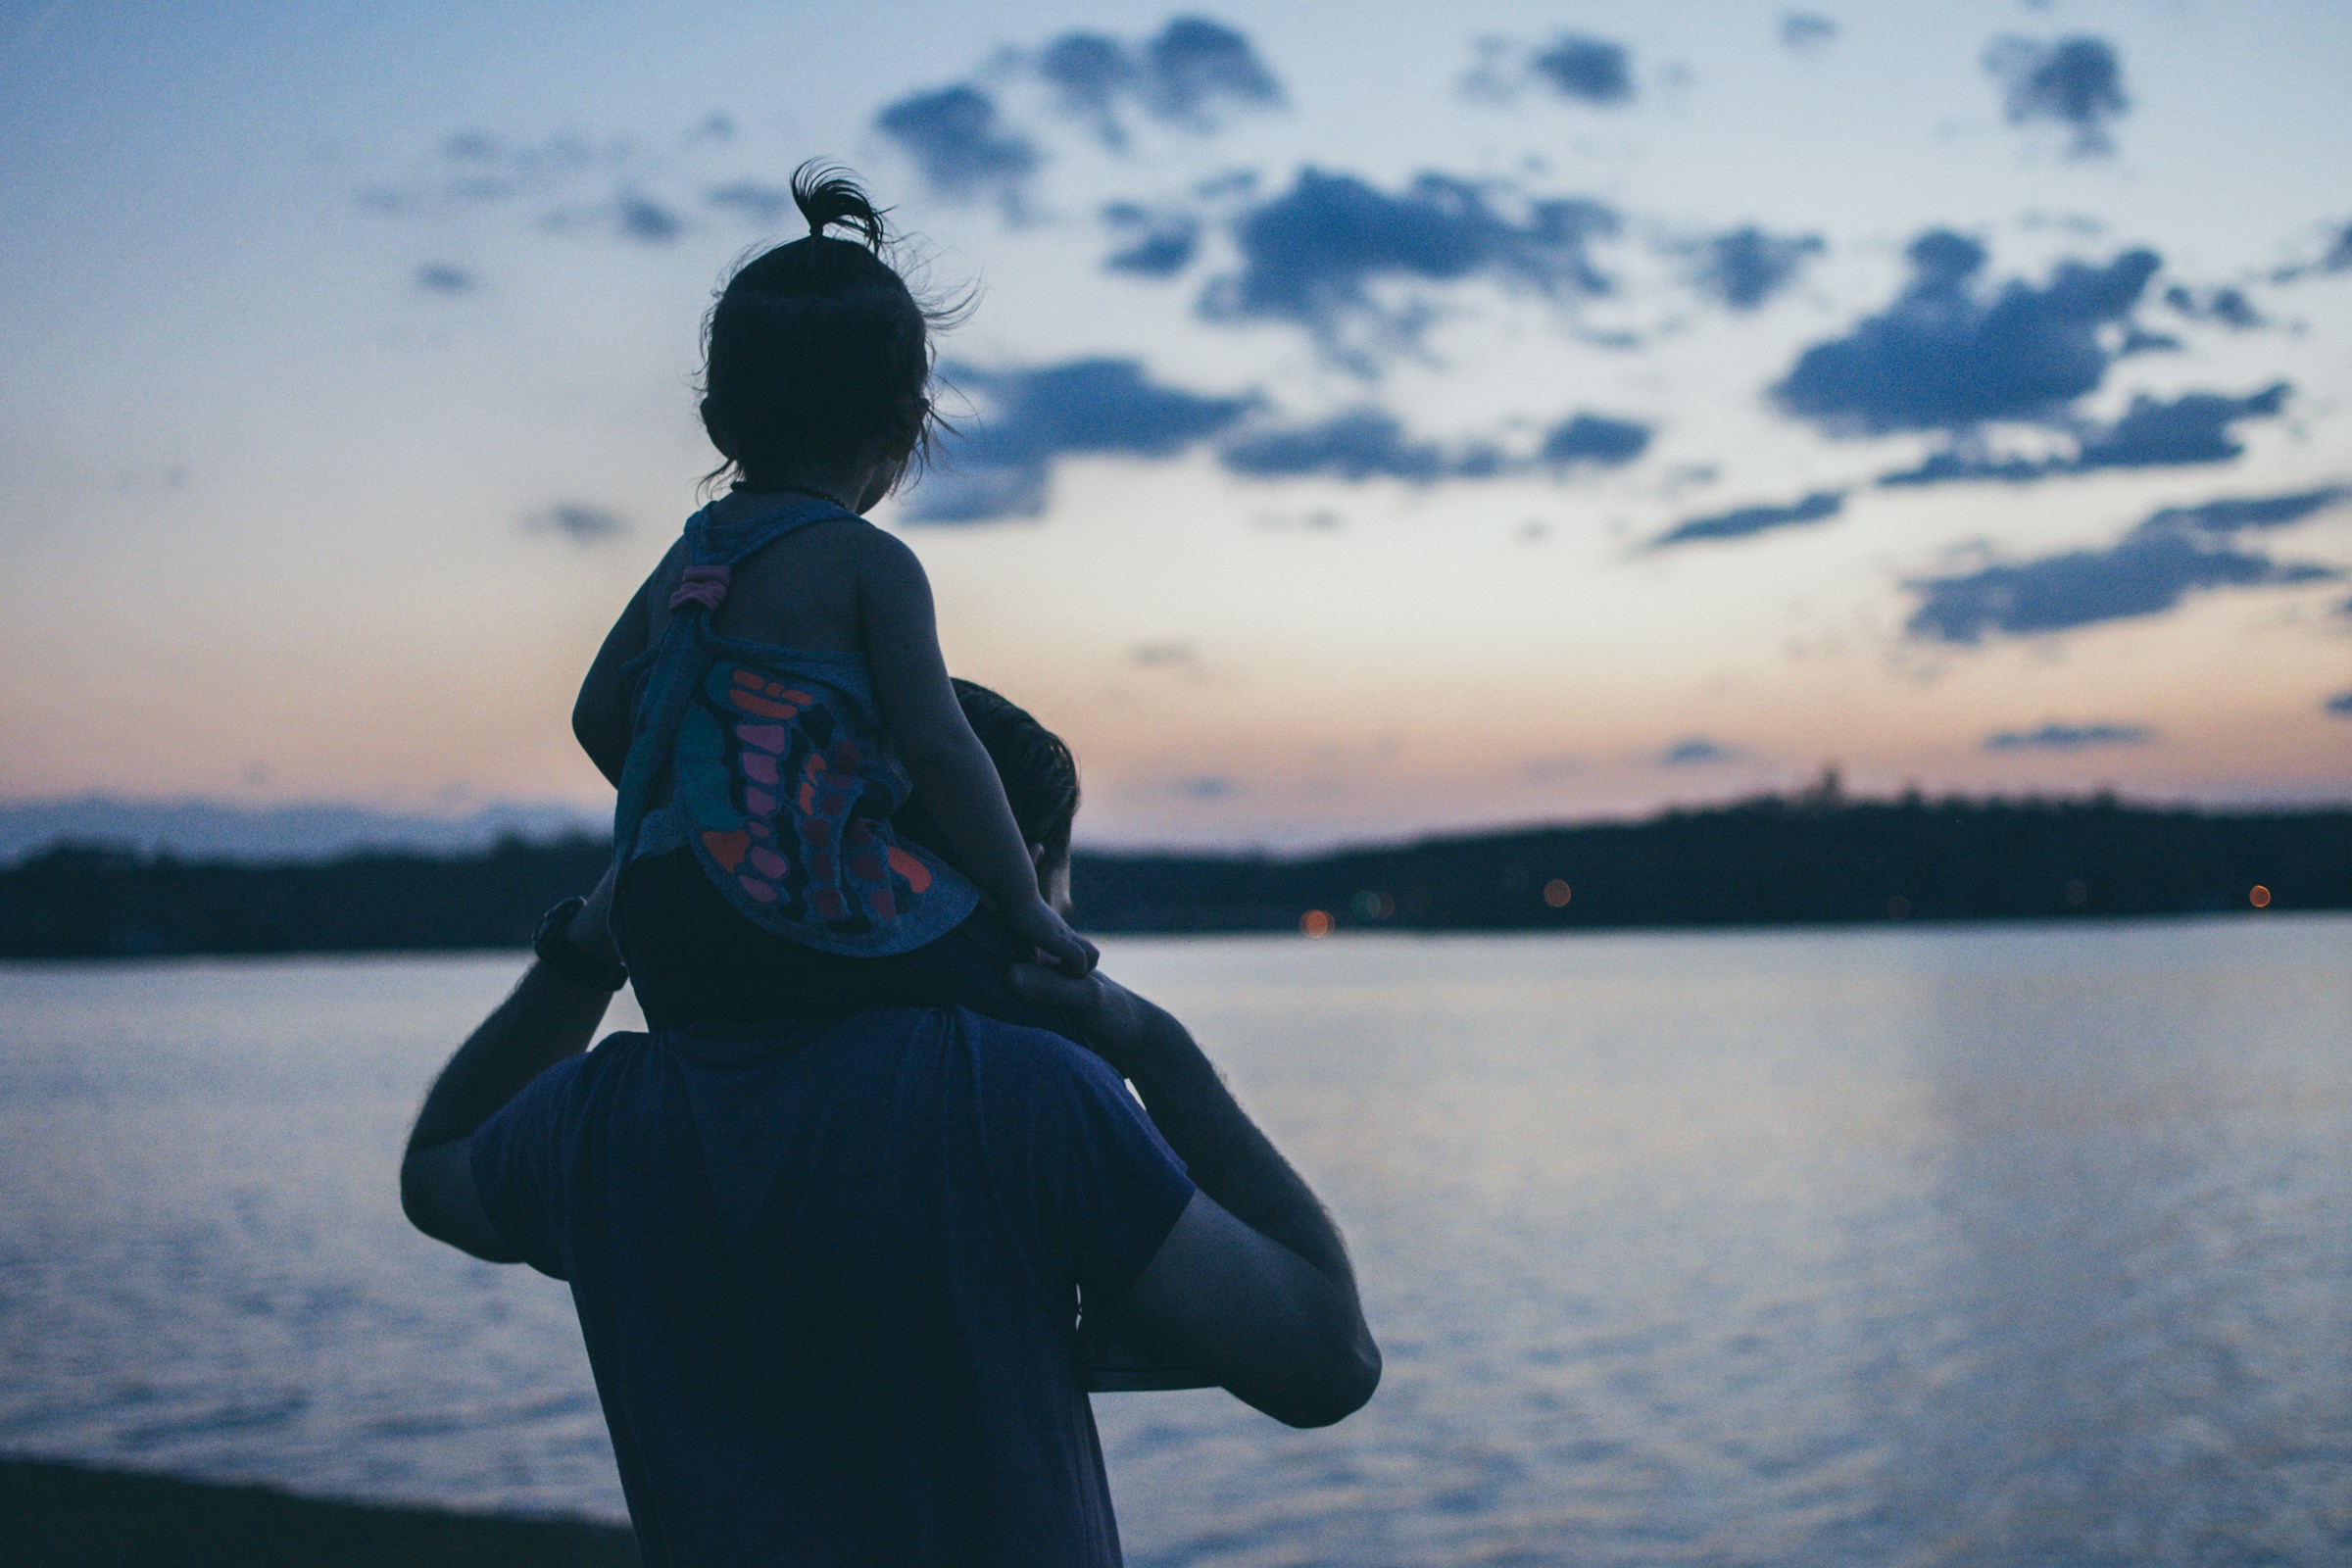 Man carrying daughter and looking at water | Source: Unsplash